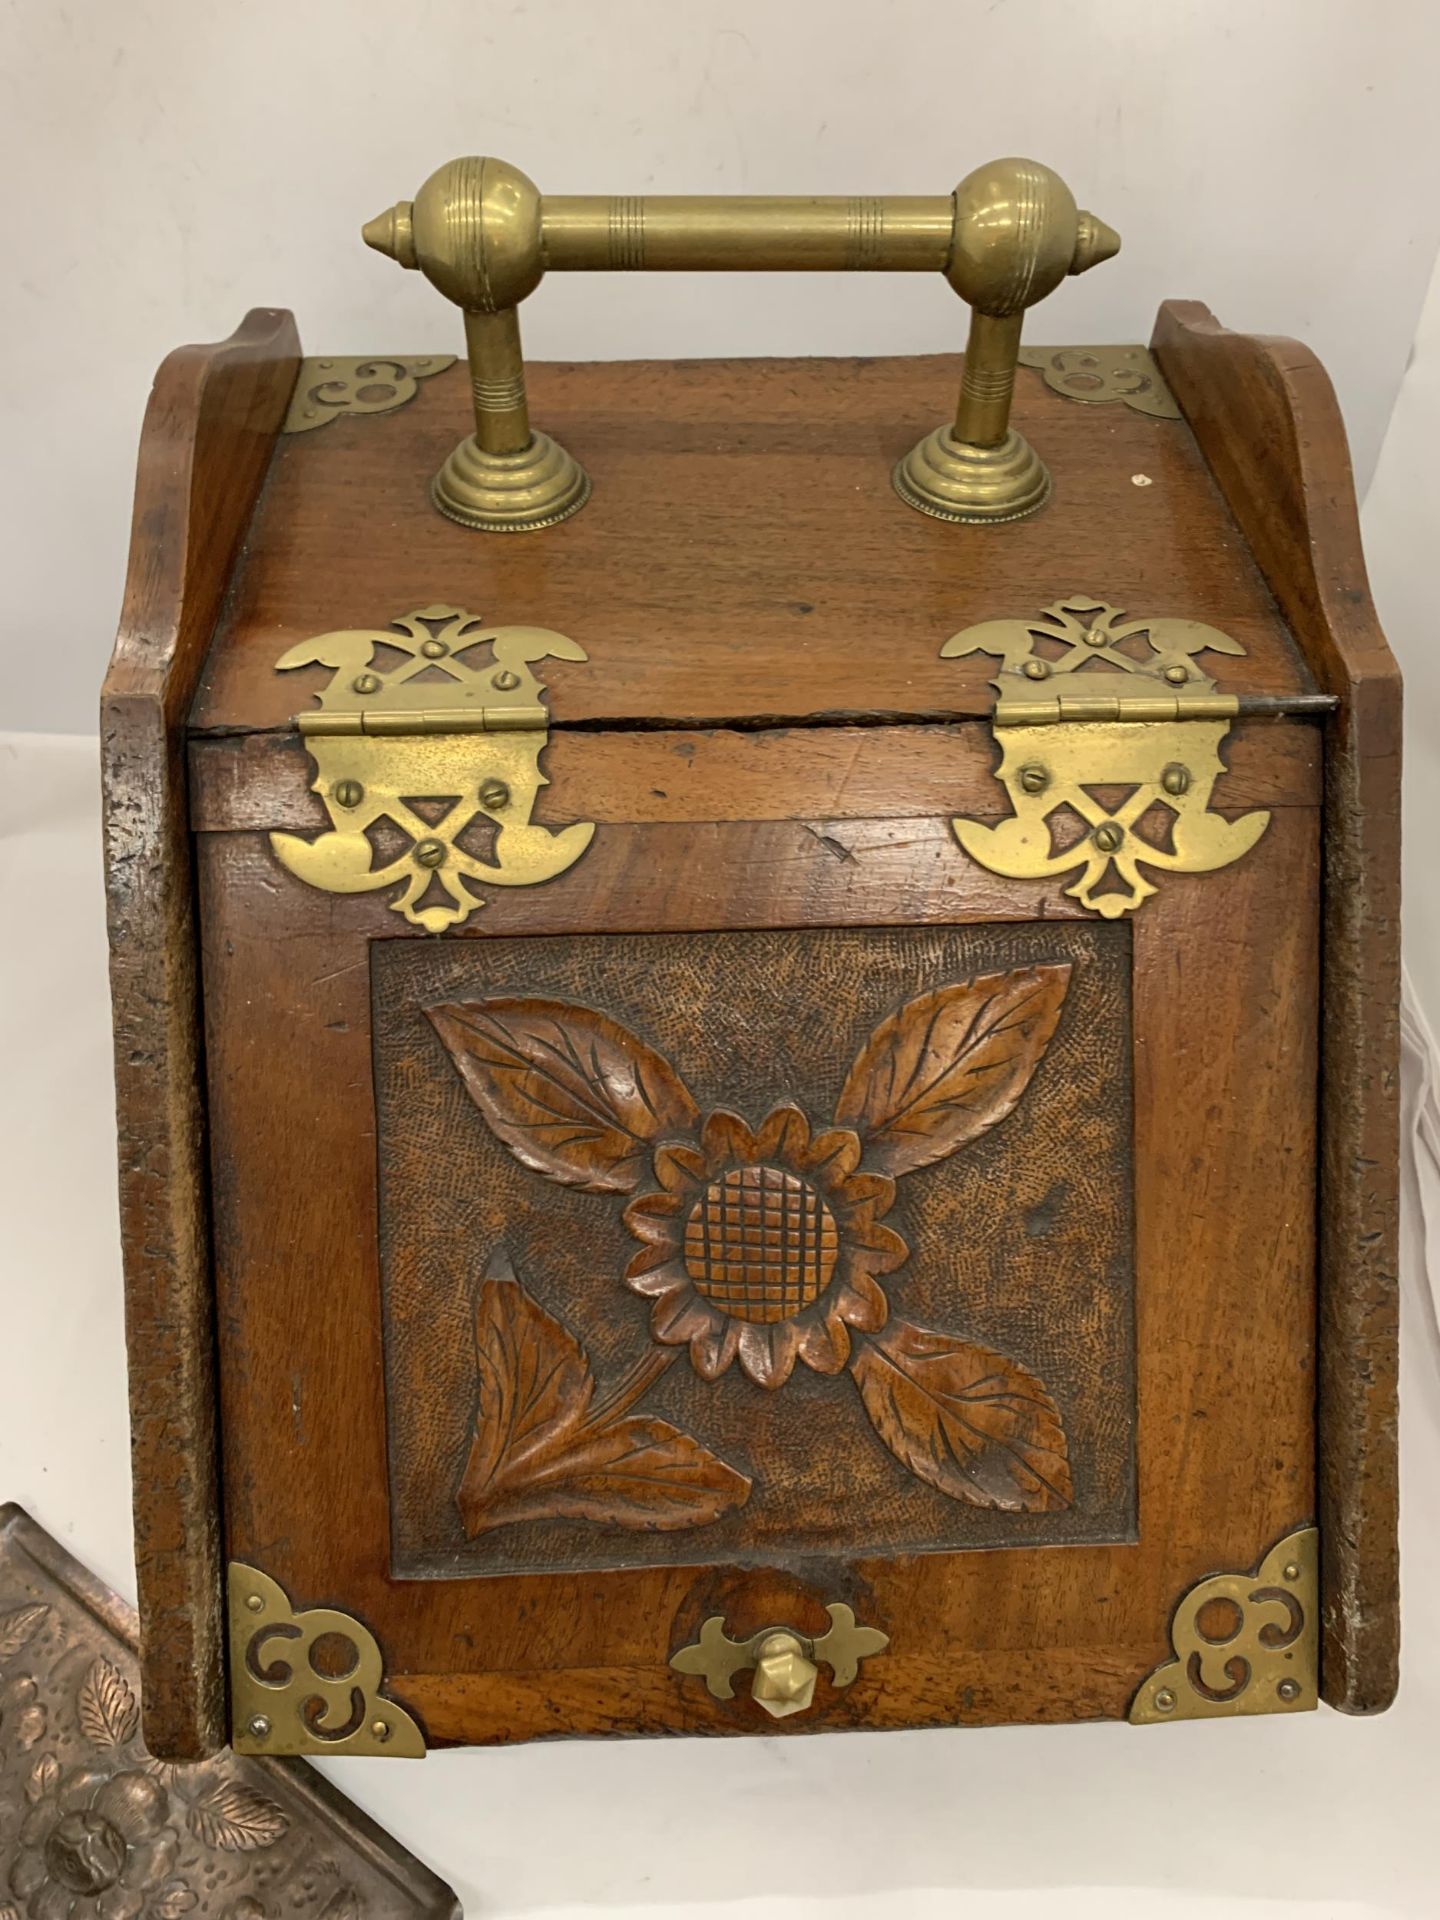 A VINTAGE OAK COAL BOX WITH BRASS FITTINGS AND HANDLE WITH CARVED FLORAL DESIGN, WITH ORIGINAL - Image 2 of 5